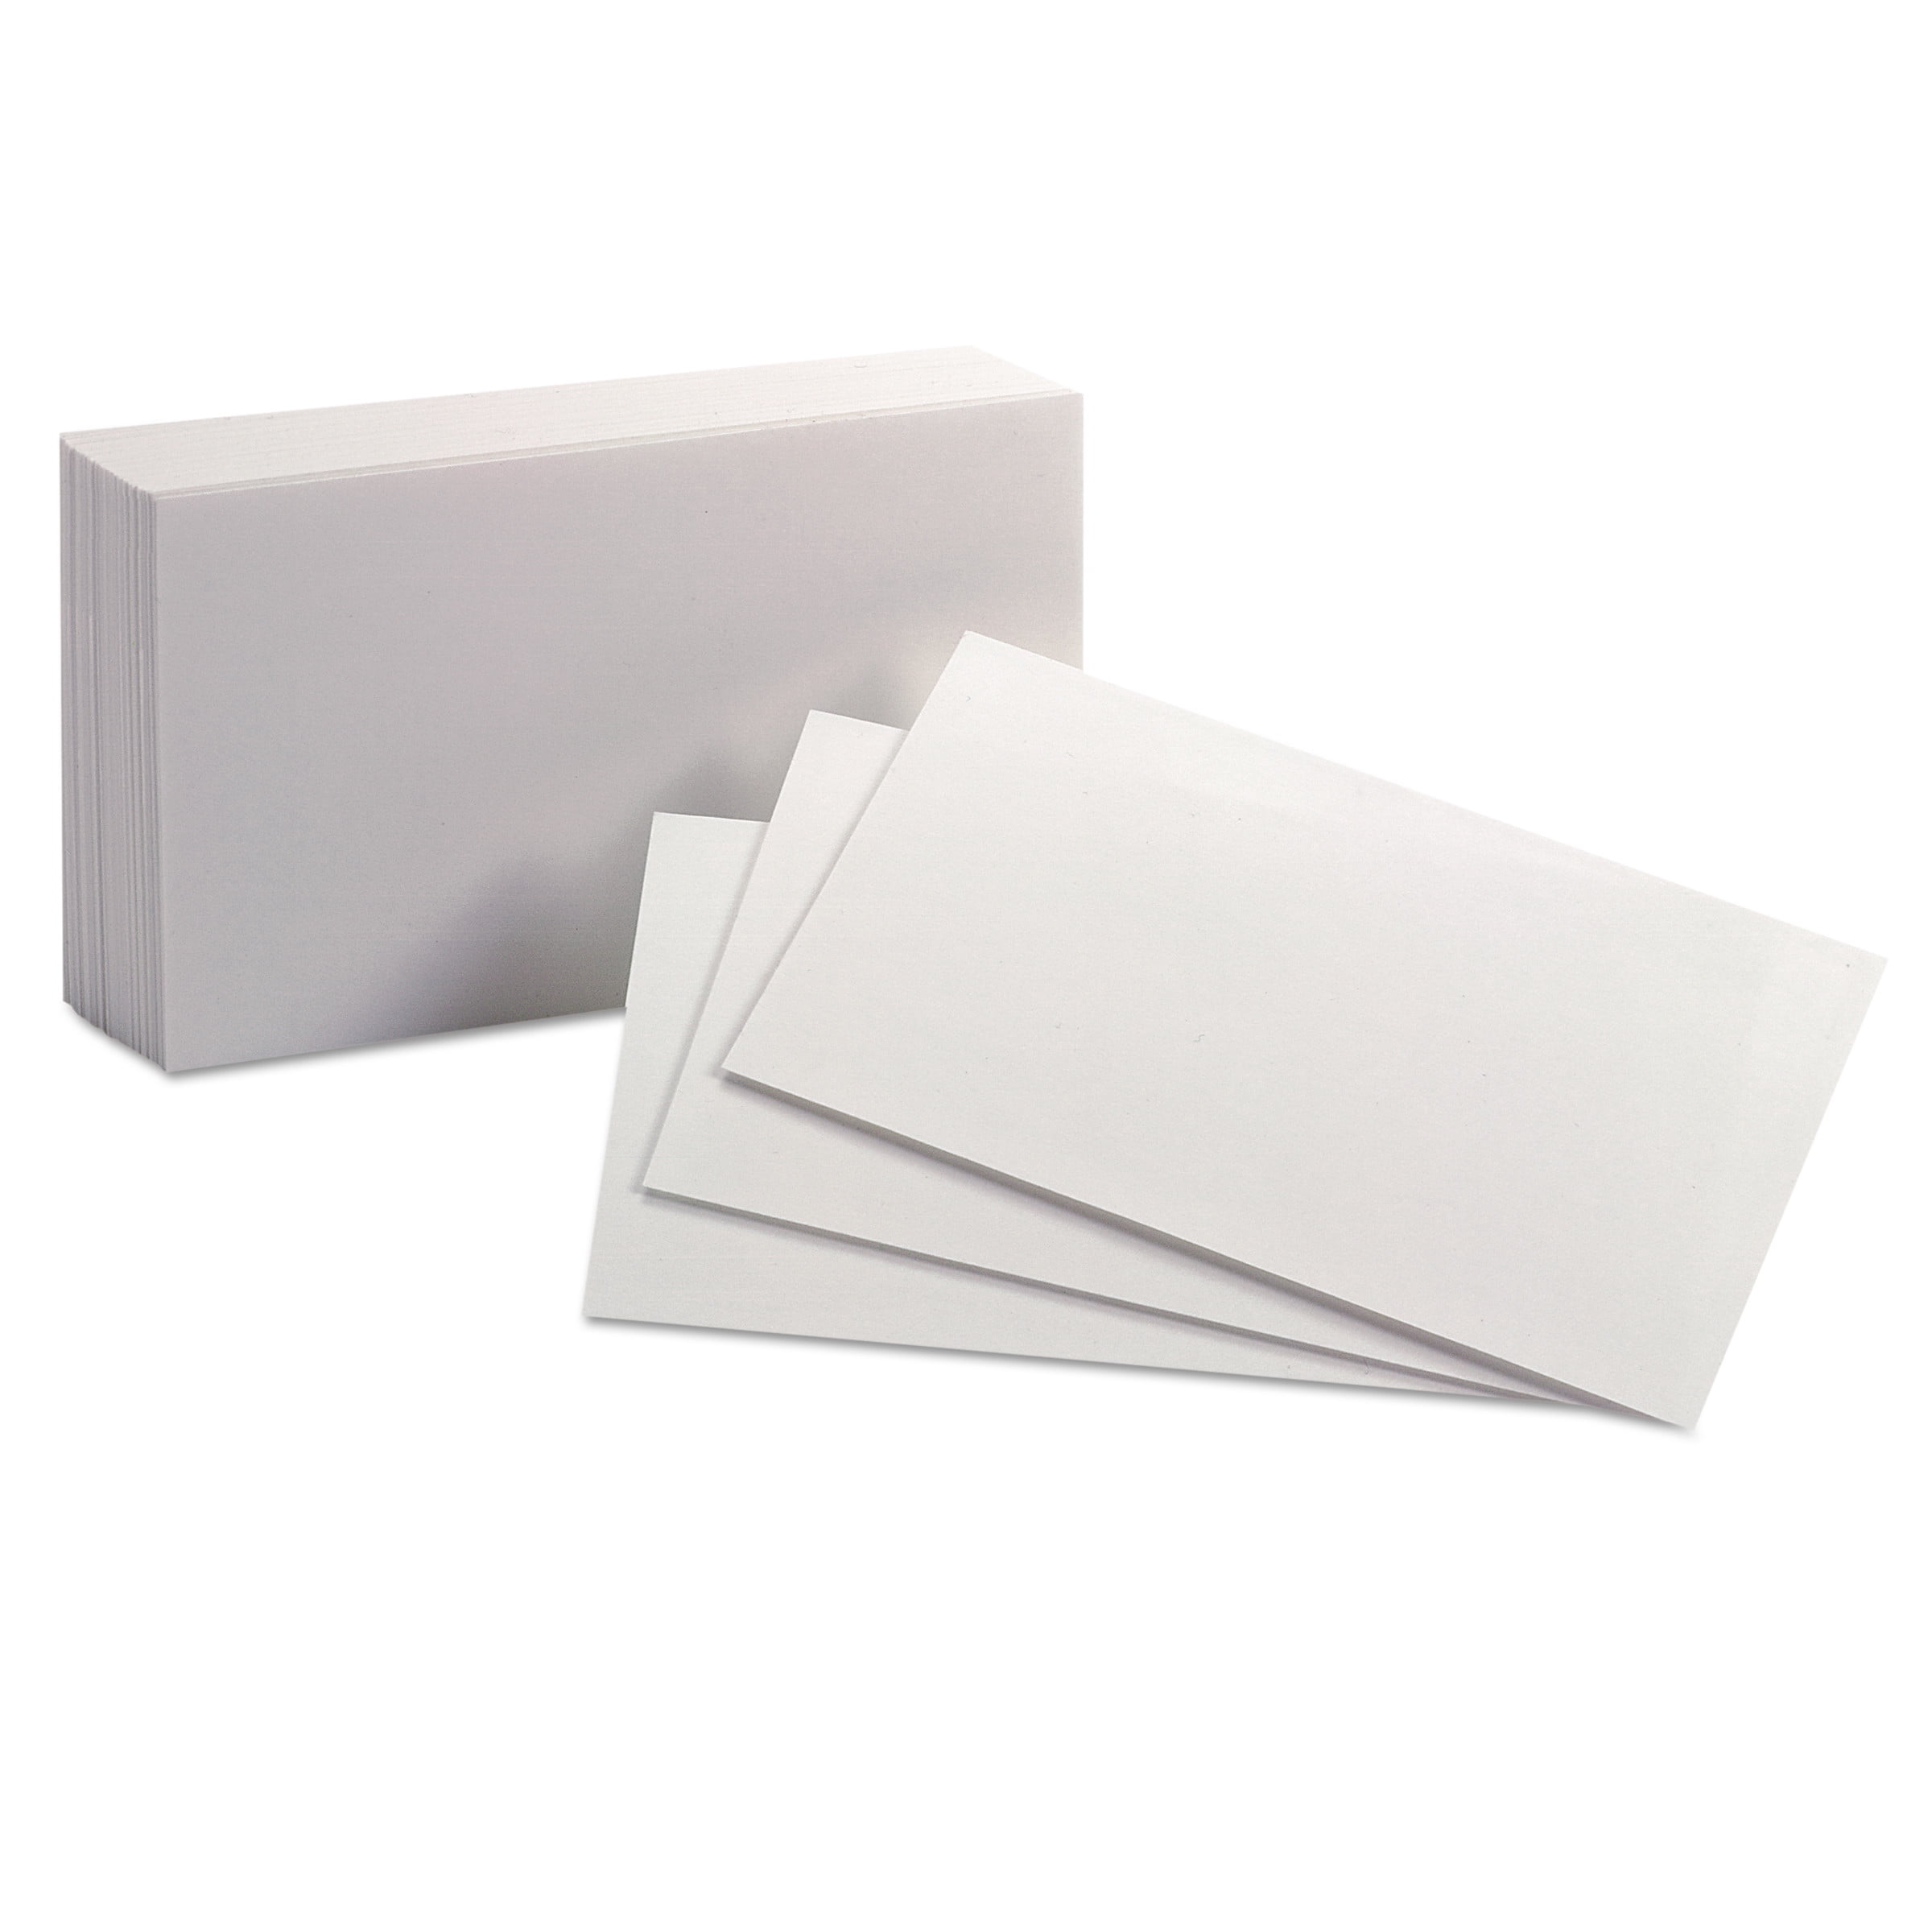 100 Count 63352 White 3 x 5 Note Cards Mead Index Cards #.1 Pack - White Plain